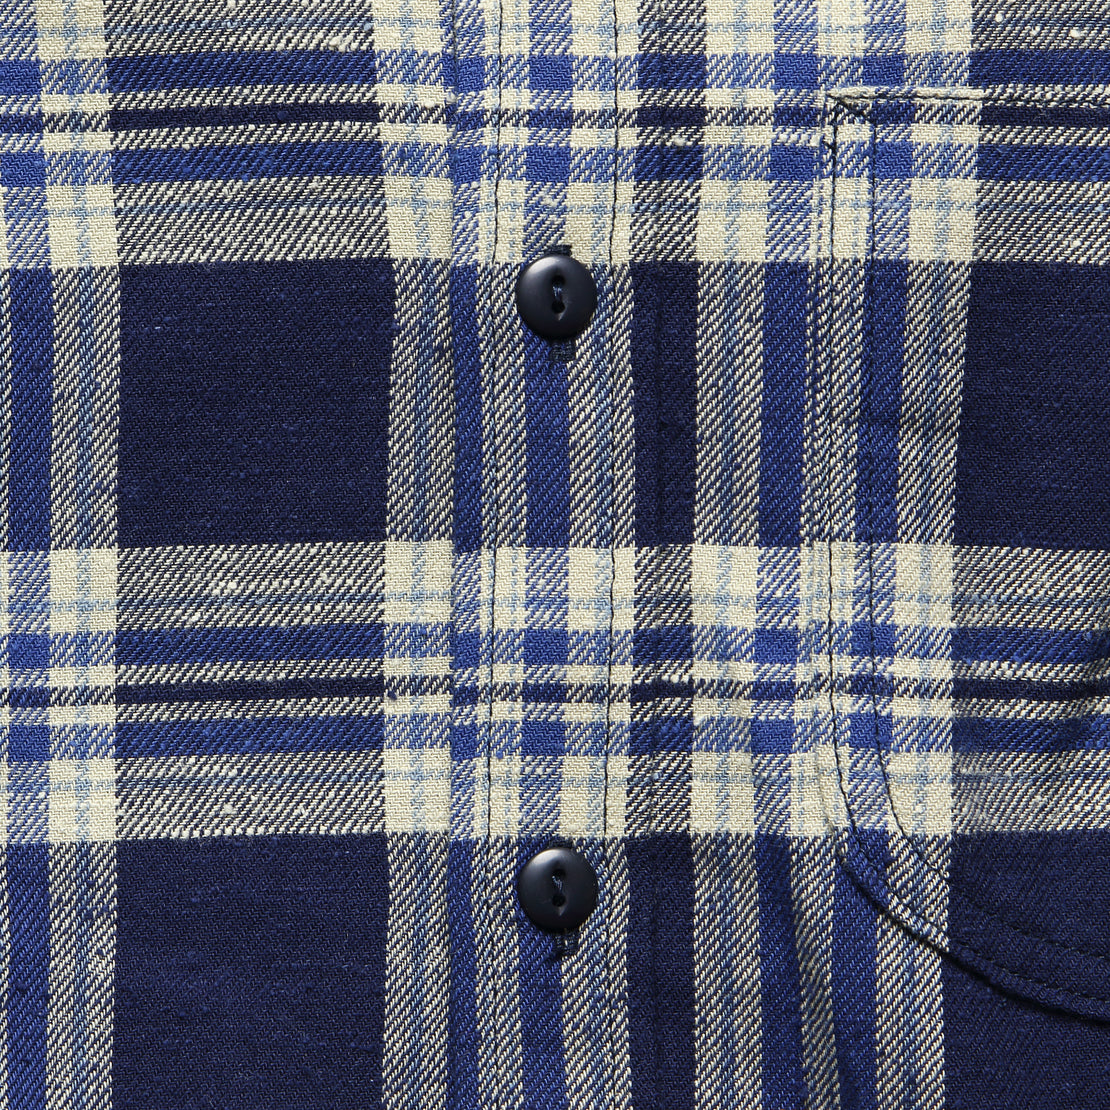 Traveler Shirt - Navy Plaid - Rogue Territory - STAG Provisions - Tops - L/S Woven - Plaid